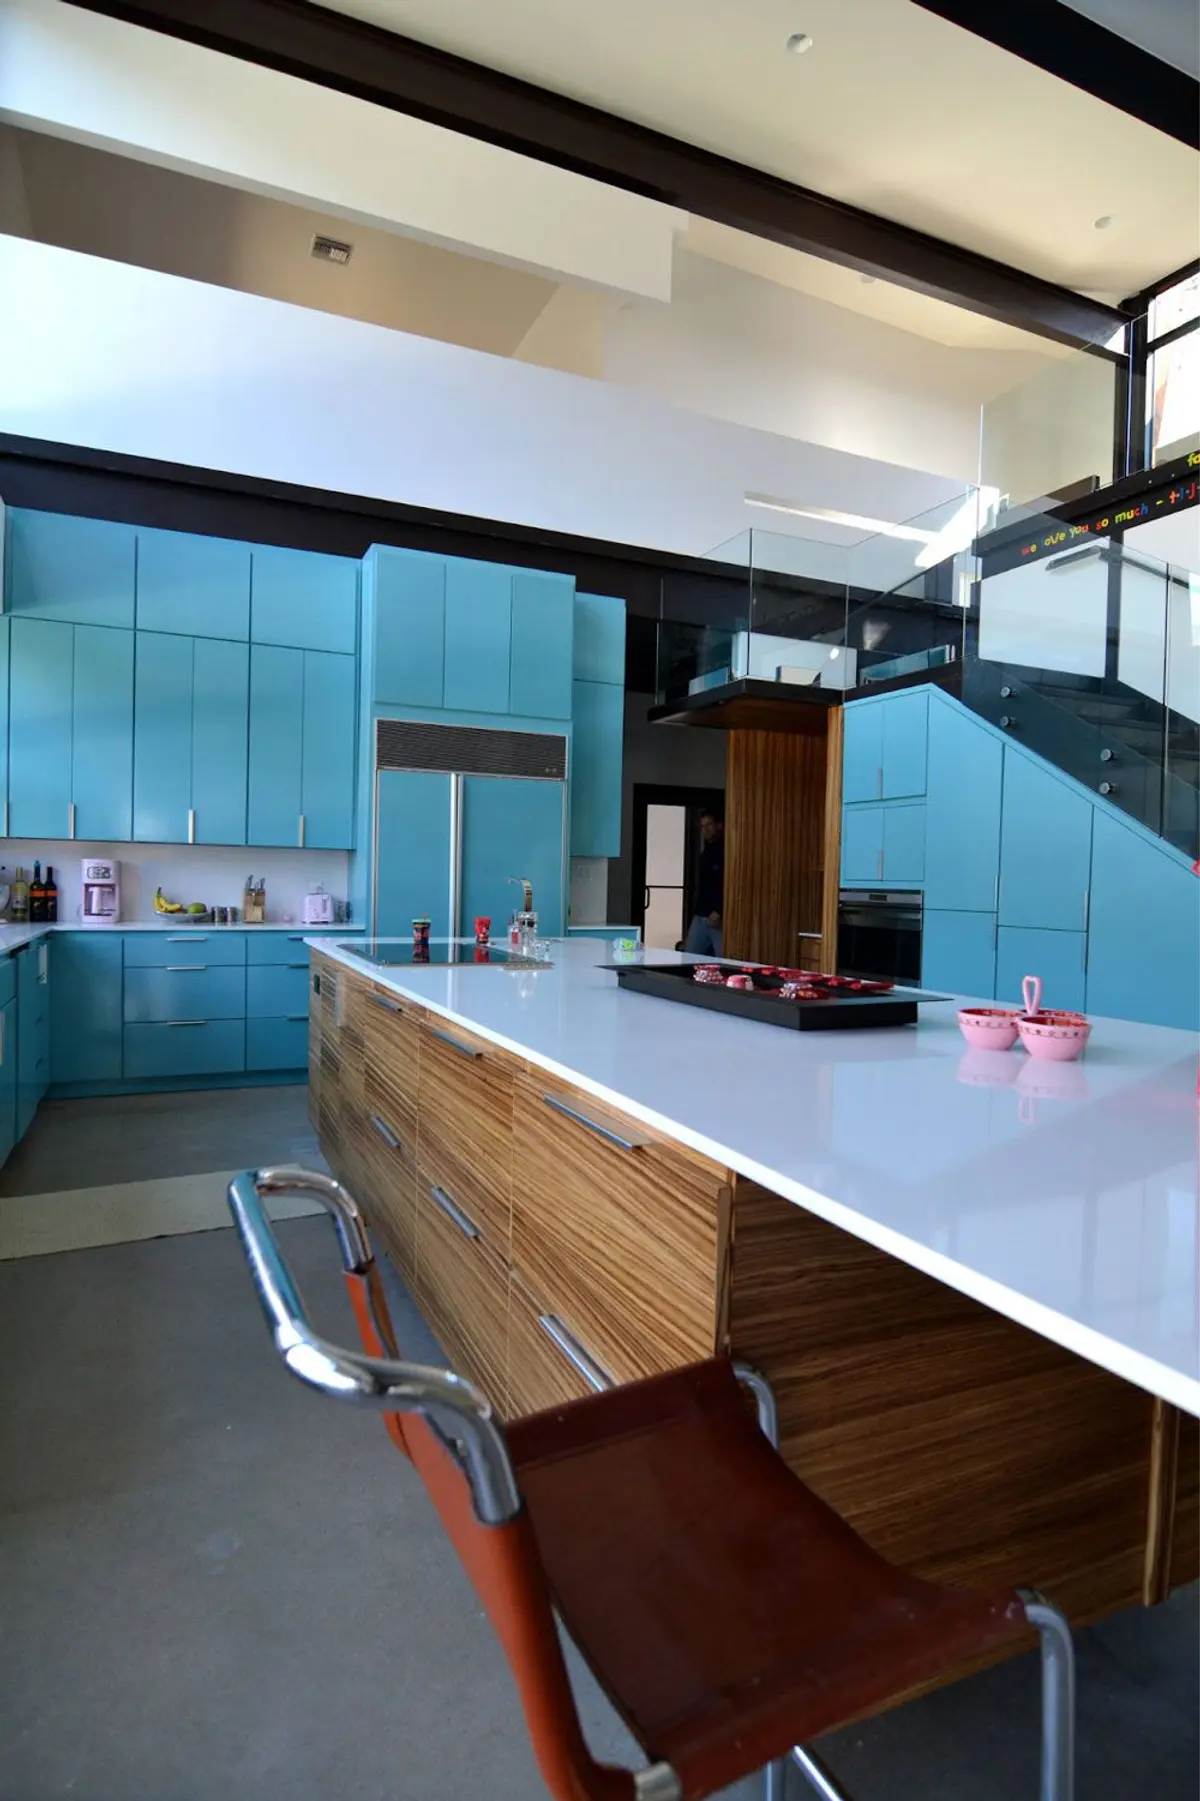 Stand Out with a Brightly-Colored Kitchen